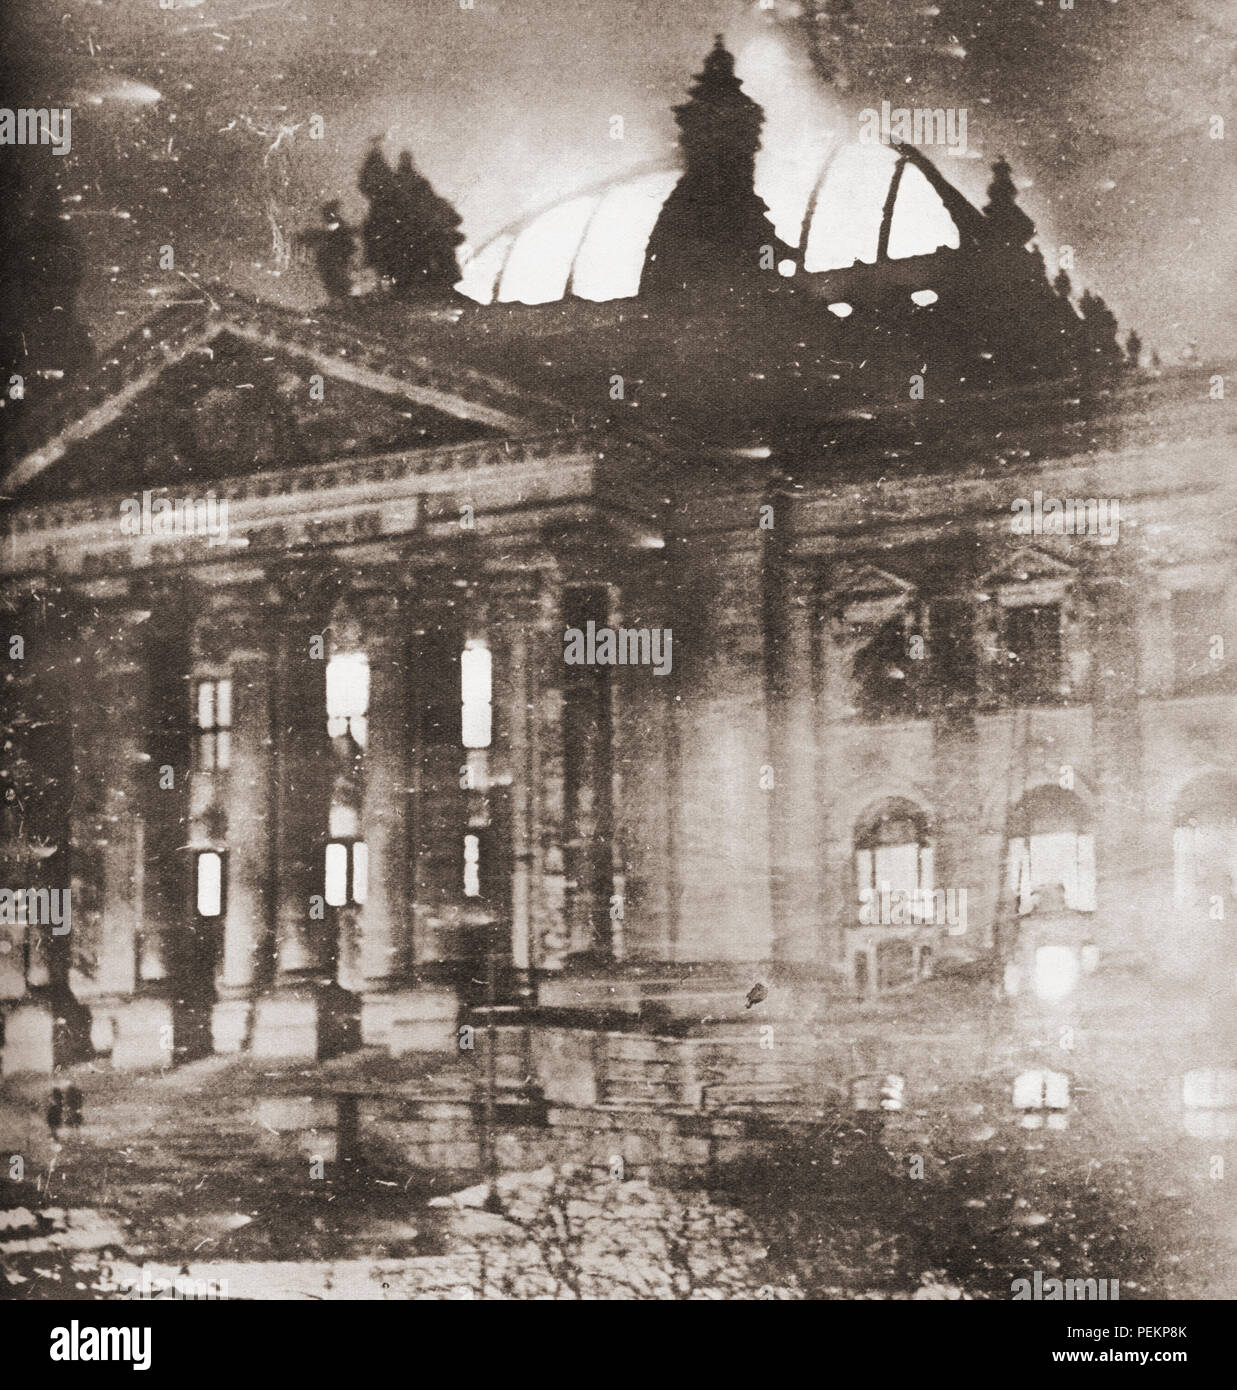 The Reichstag fire, an arson attack on the Reichstag building, Berlin on 27 February 1933.  From These Tremendous Years, published 1938. Stock Photo